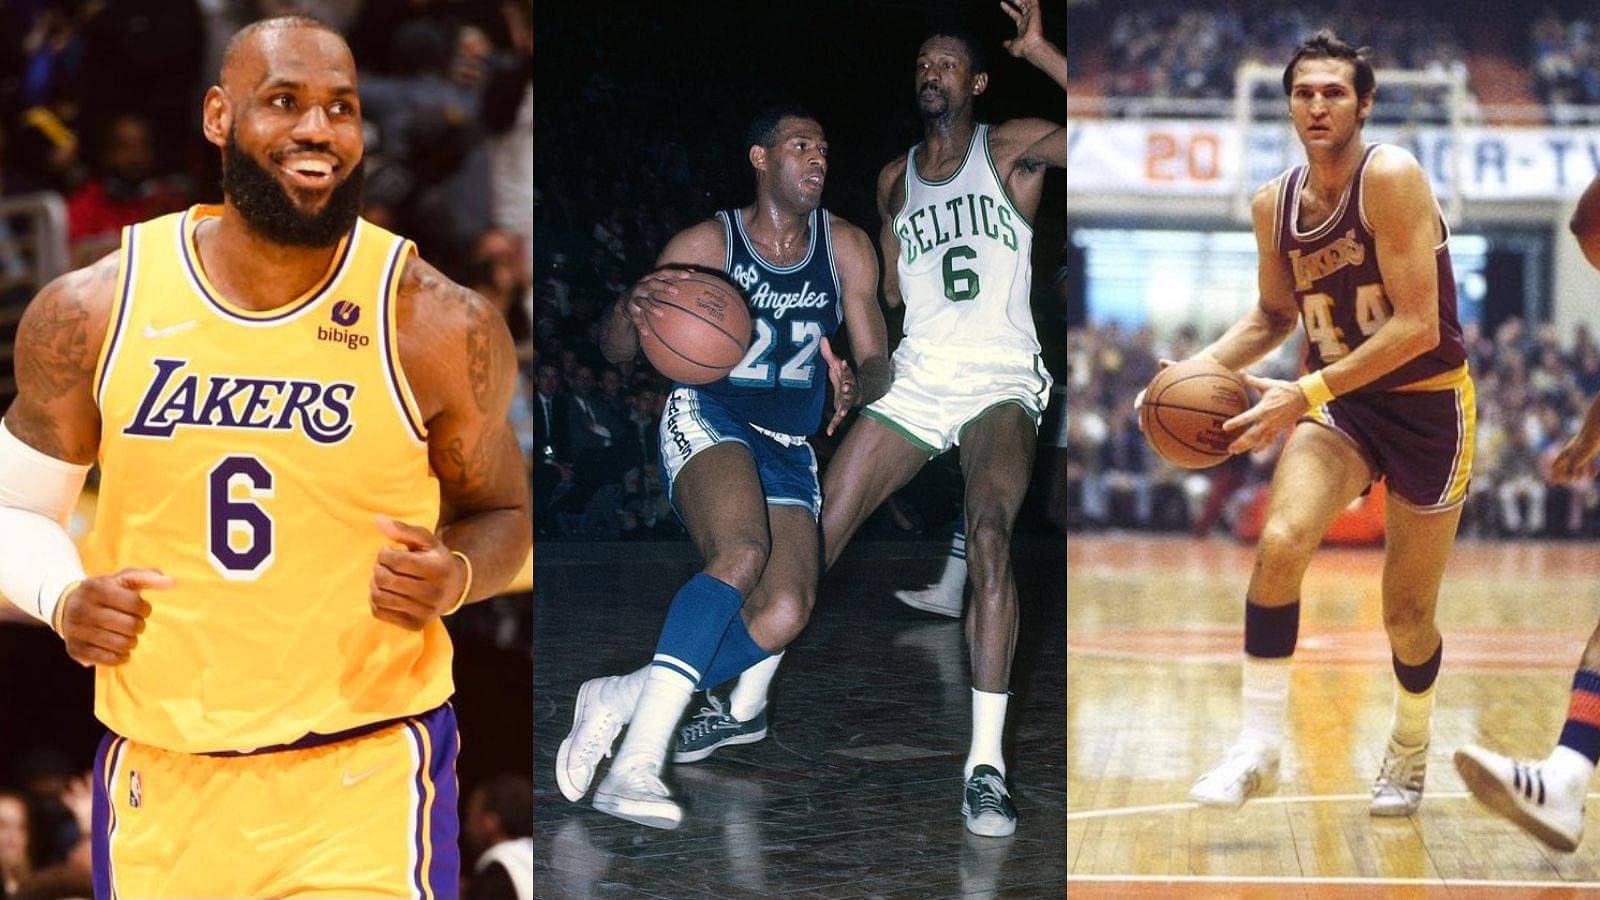 “Neither LeBron James nor Jerry West, Elgin Baylor has the most NBA Finals losses”: The Logo and the Lakers wouldn’t win their first NBA title until Mr. Inside retired in 1972